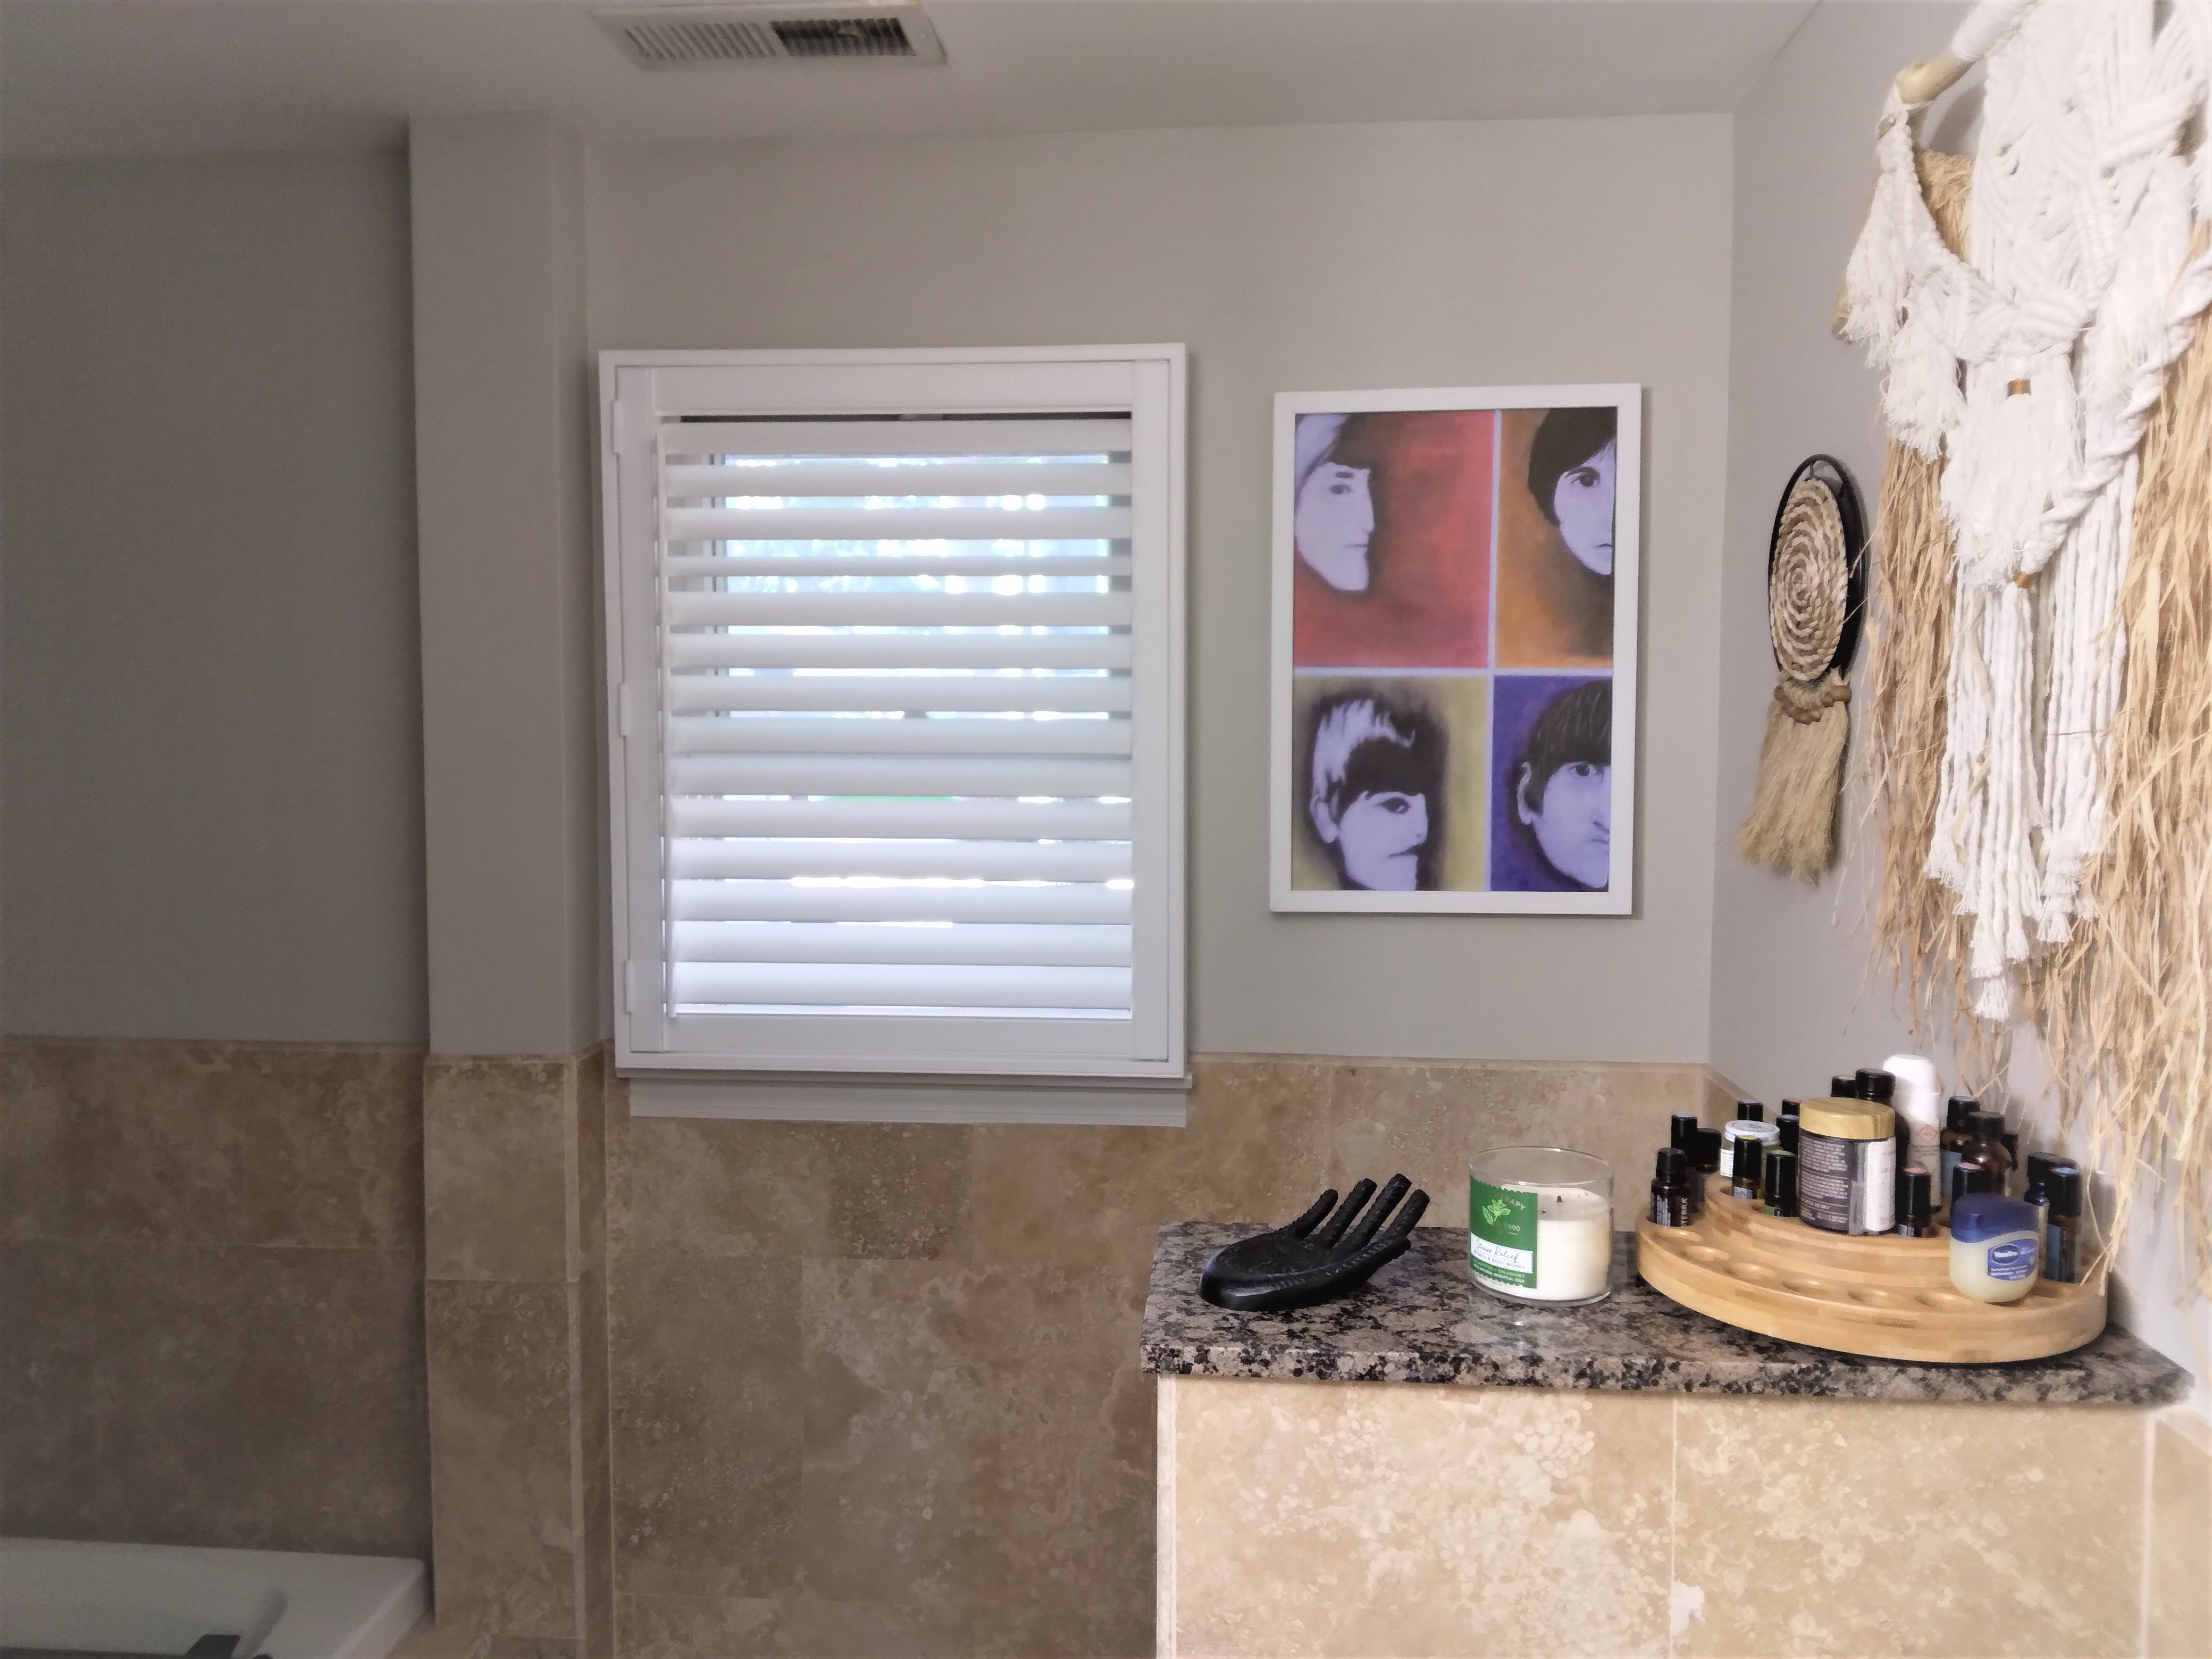 Polyresin shutters are a great window covering choice for a bathroom. They are water and moisture proof, and easy to clean.  BudgetBlinds  WindowCoverings  Shutters  SpringfieldIllinois